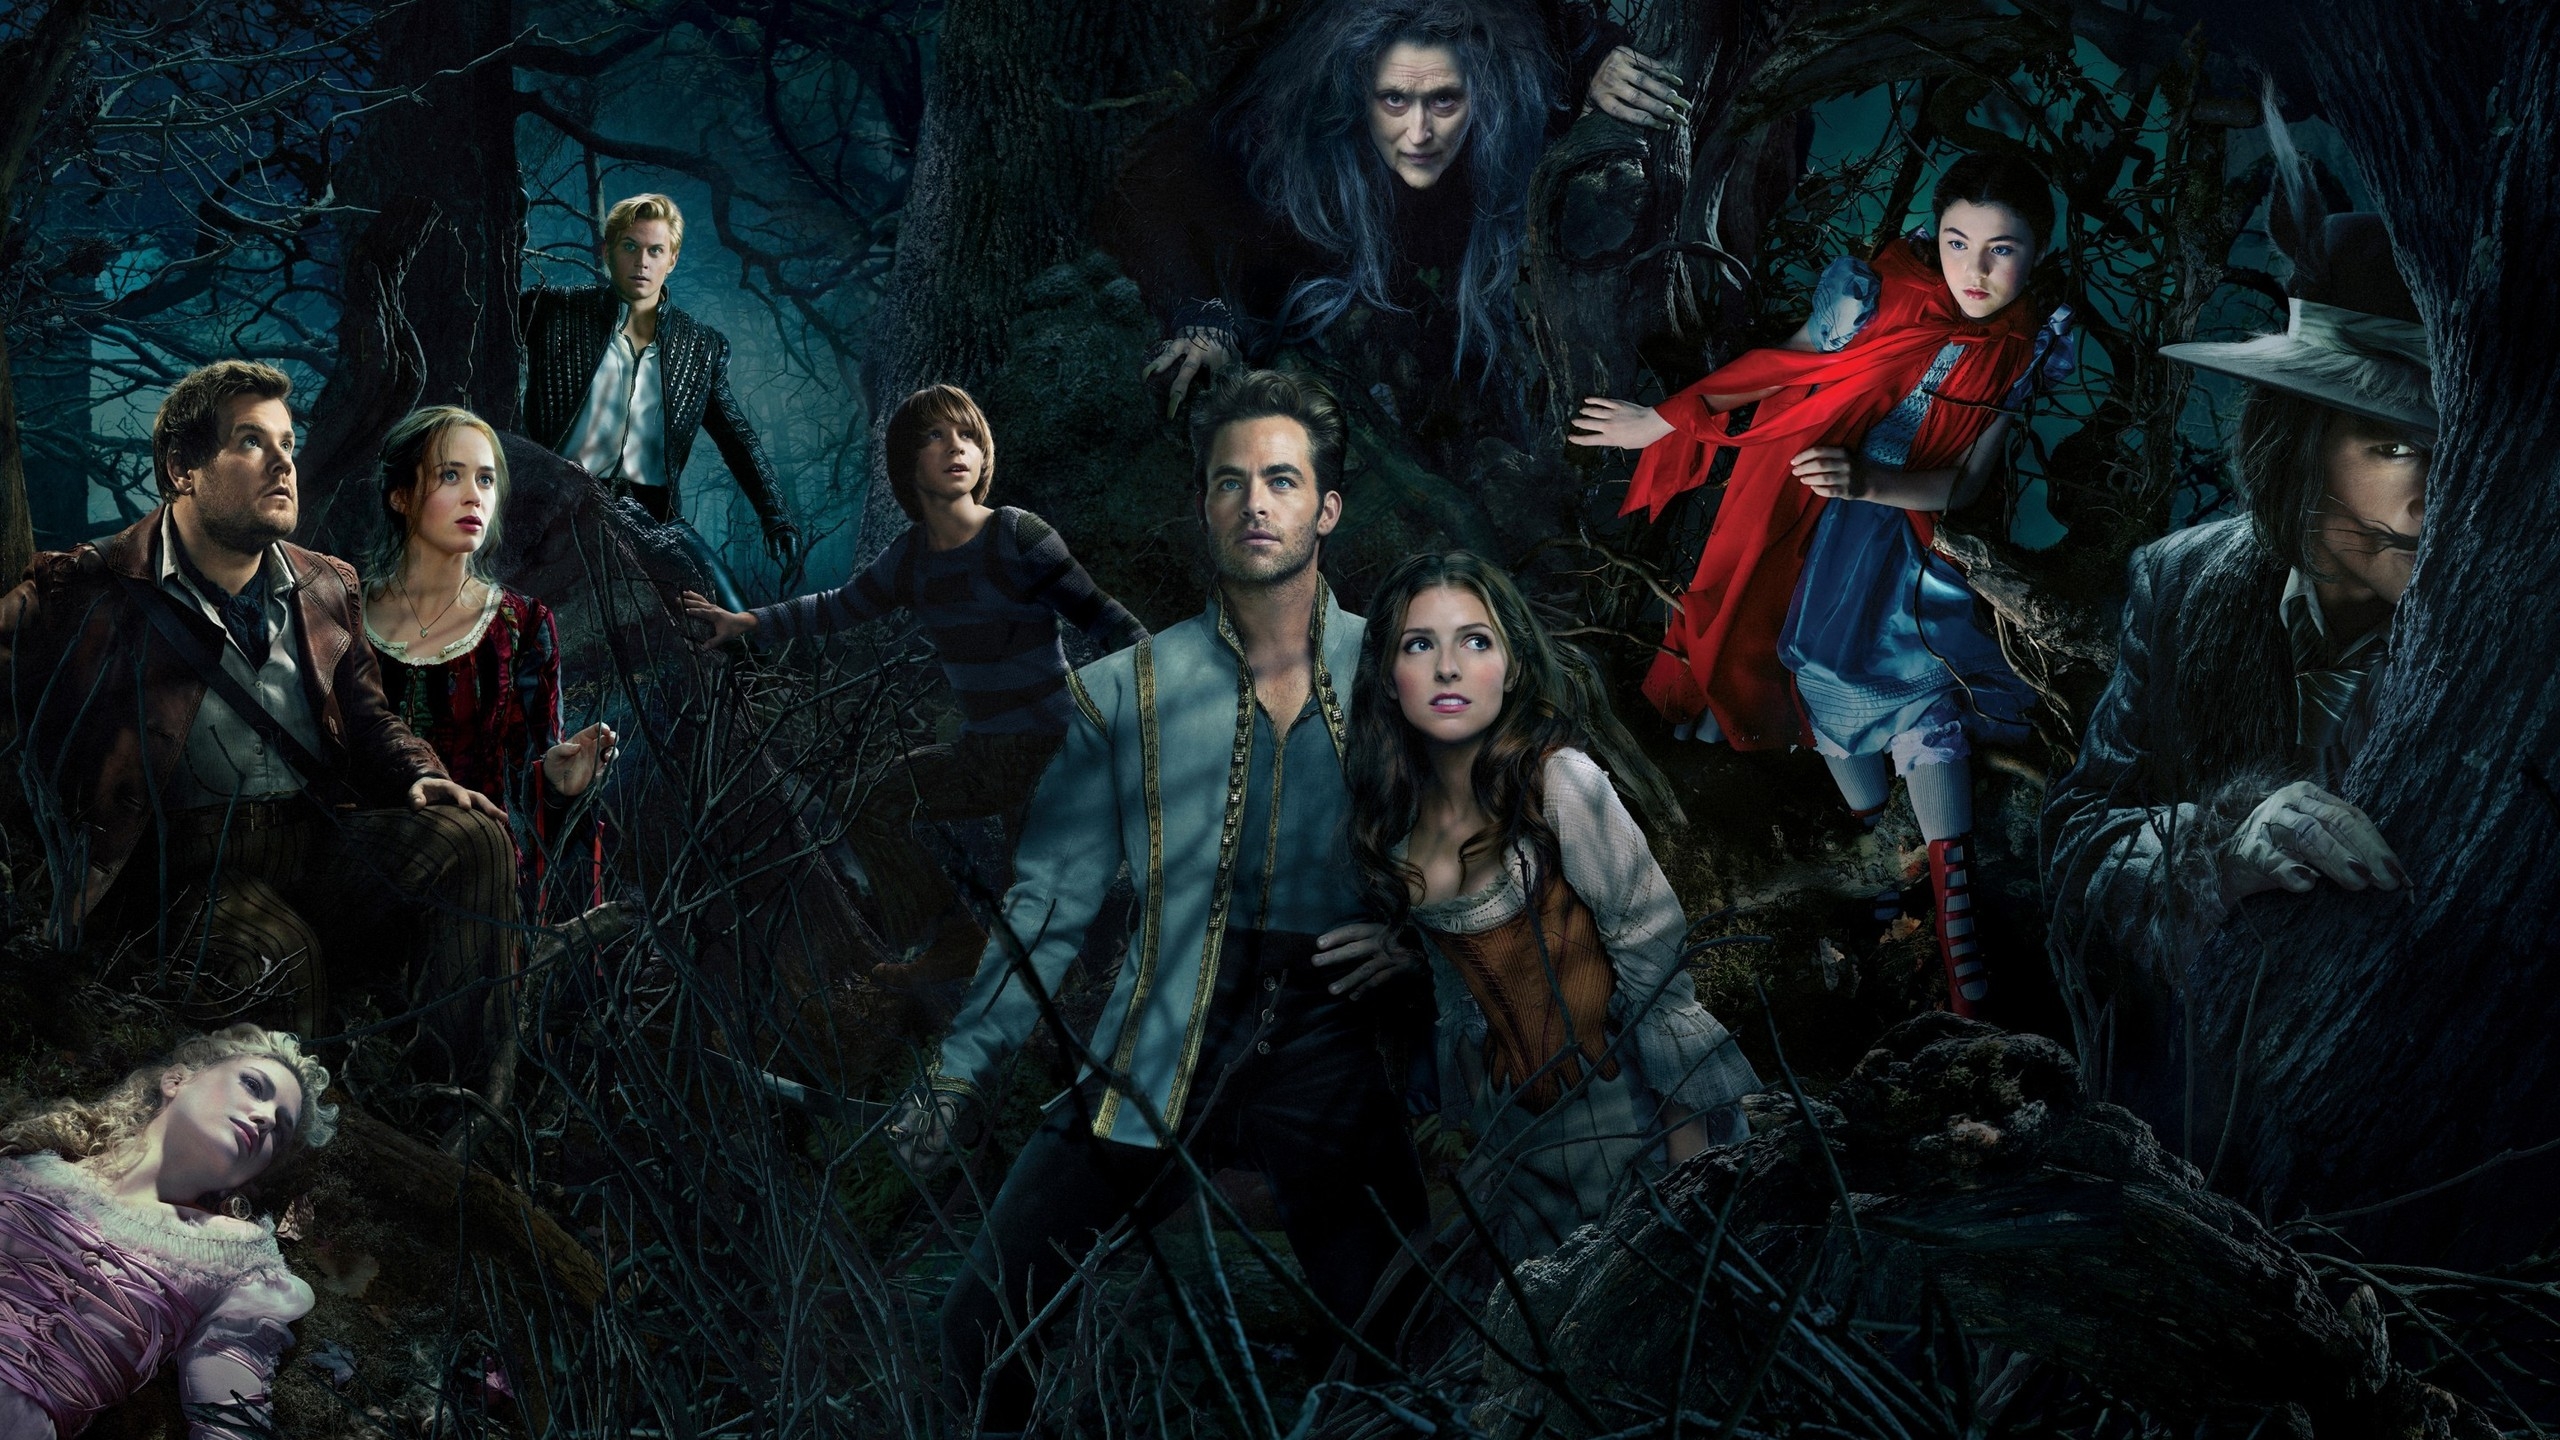 Into the Woods Poster for 2560x1440 HDTV resolution